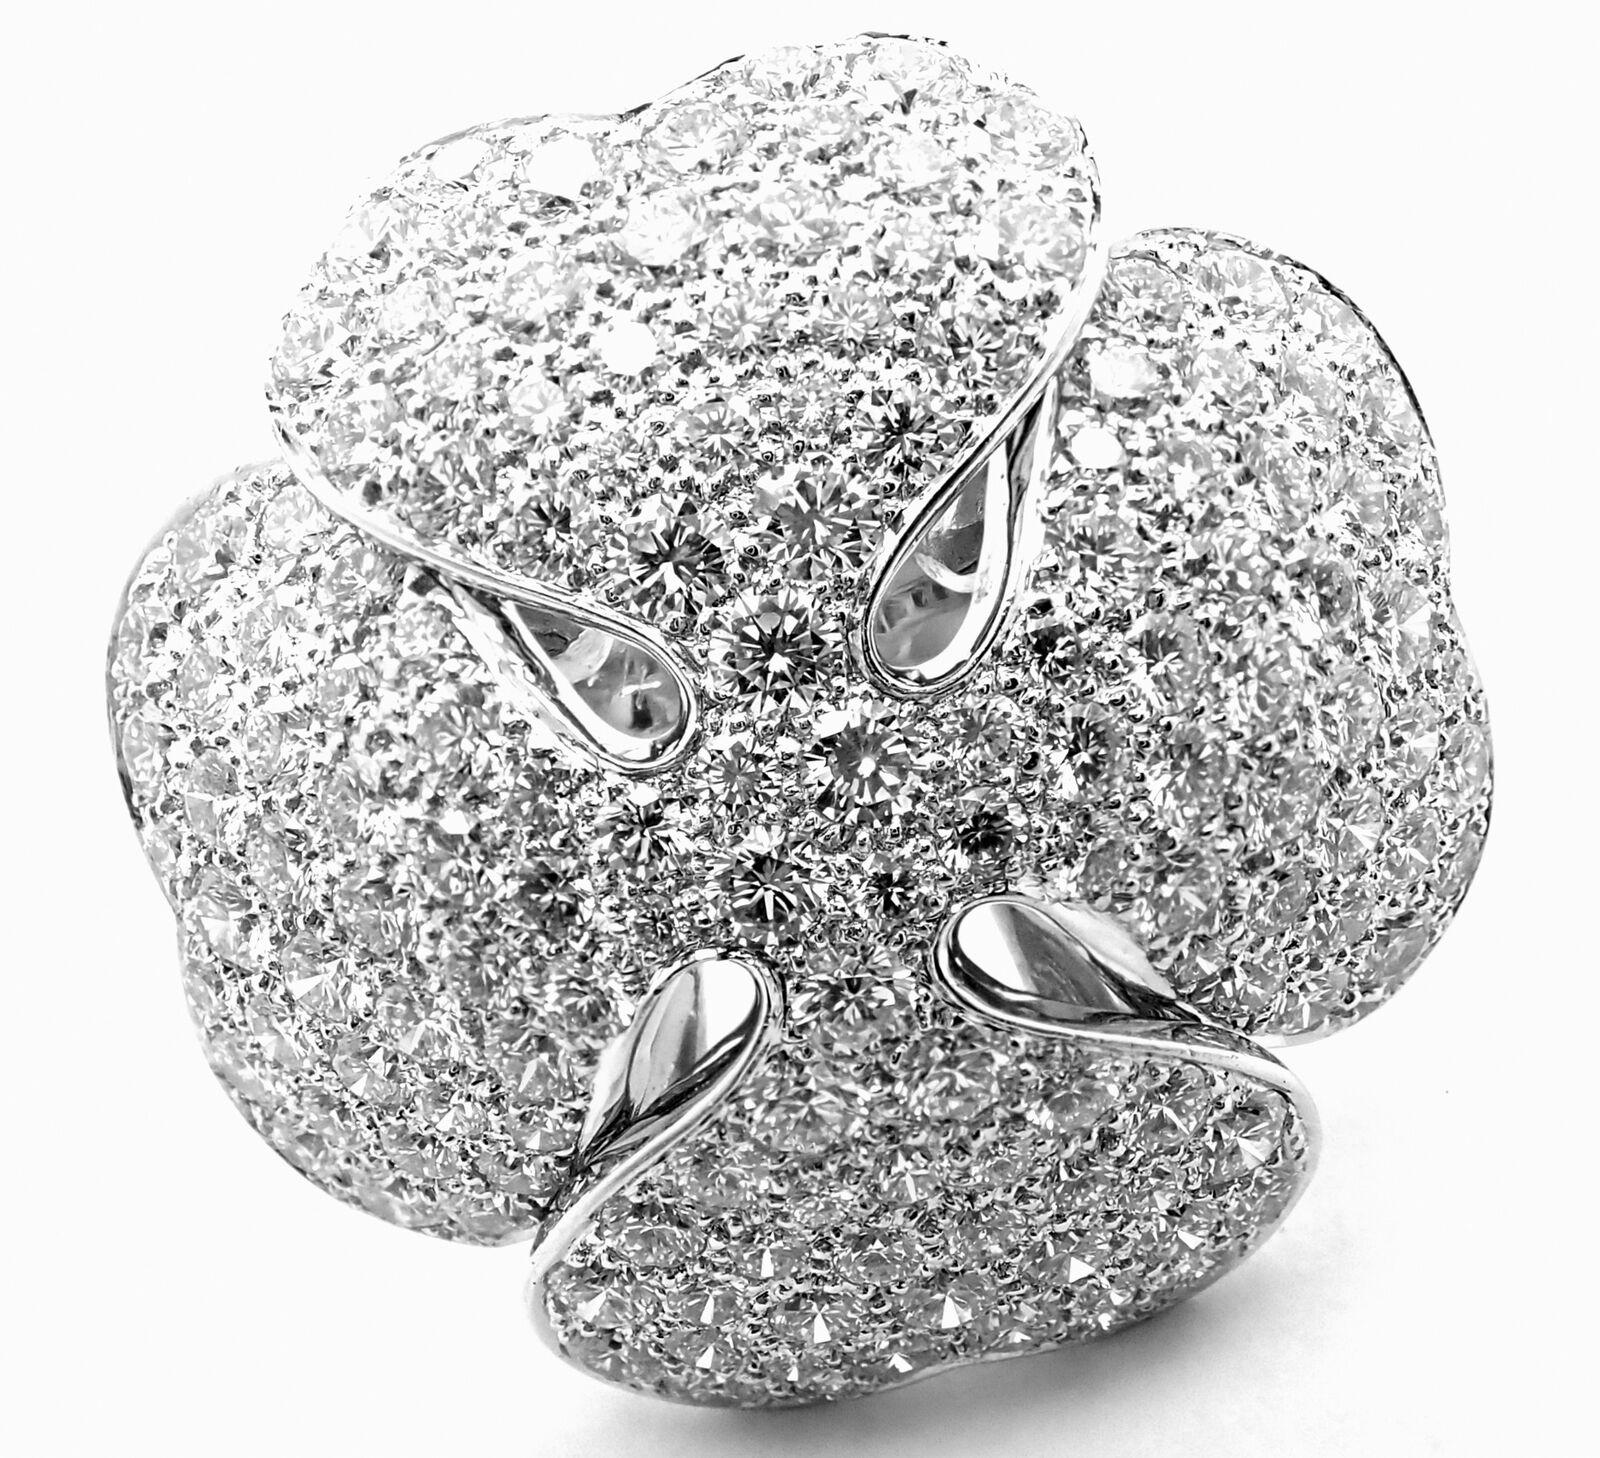 18k White Gold Anniversary Edition Diamond Pave Clover Cocktail Ring by Cartier.  
This is Anniversary edition Cartier ring from year 2001.
With Round brilliant cut diamonds VVS1 clarity, E color total weight approximately 10ct
Details: 
Ring Size: